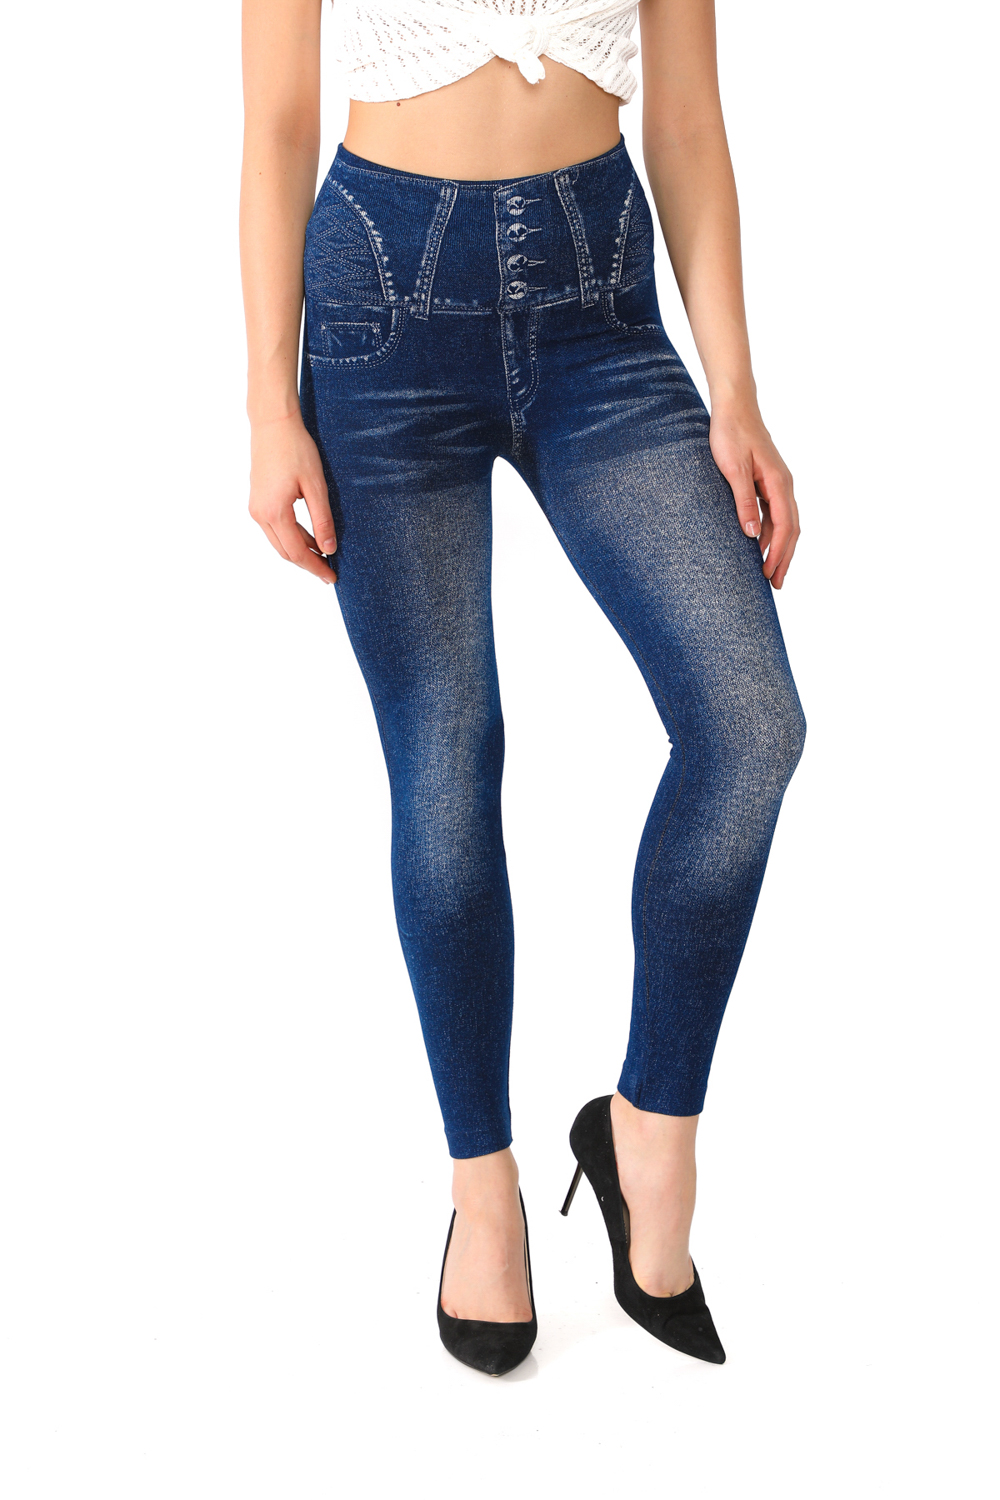 Denim Leggings with Fake Pockets and Button Pattern - 6